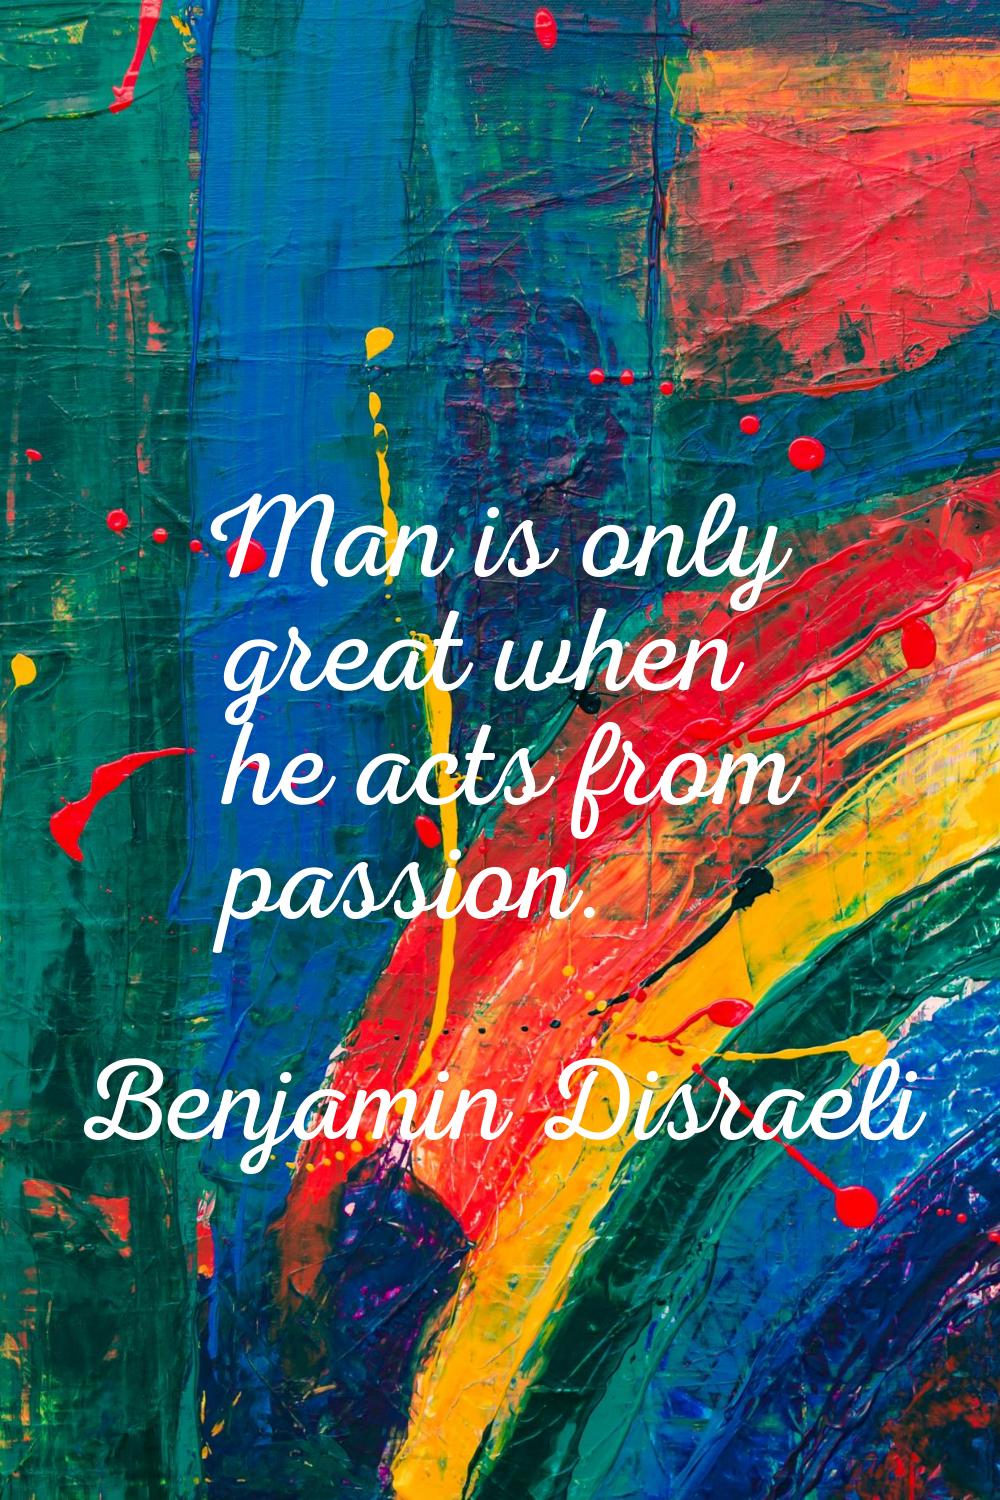 Man is only great when he acts from passion.